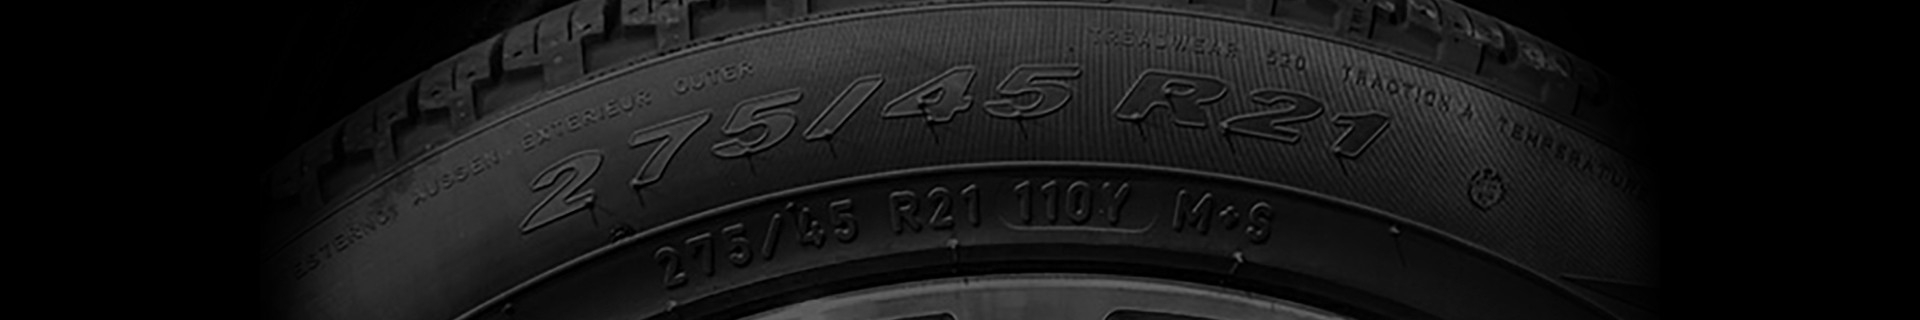 Tyre Number Meanings Explained In Full